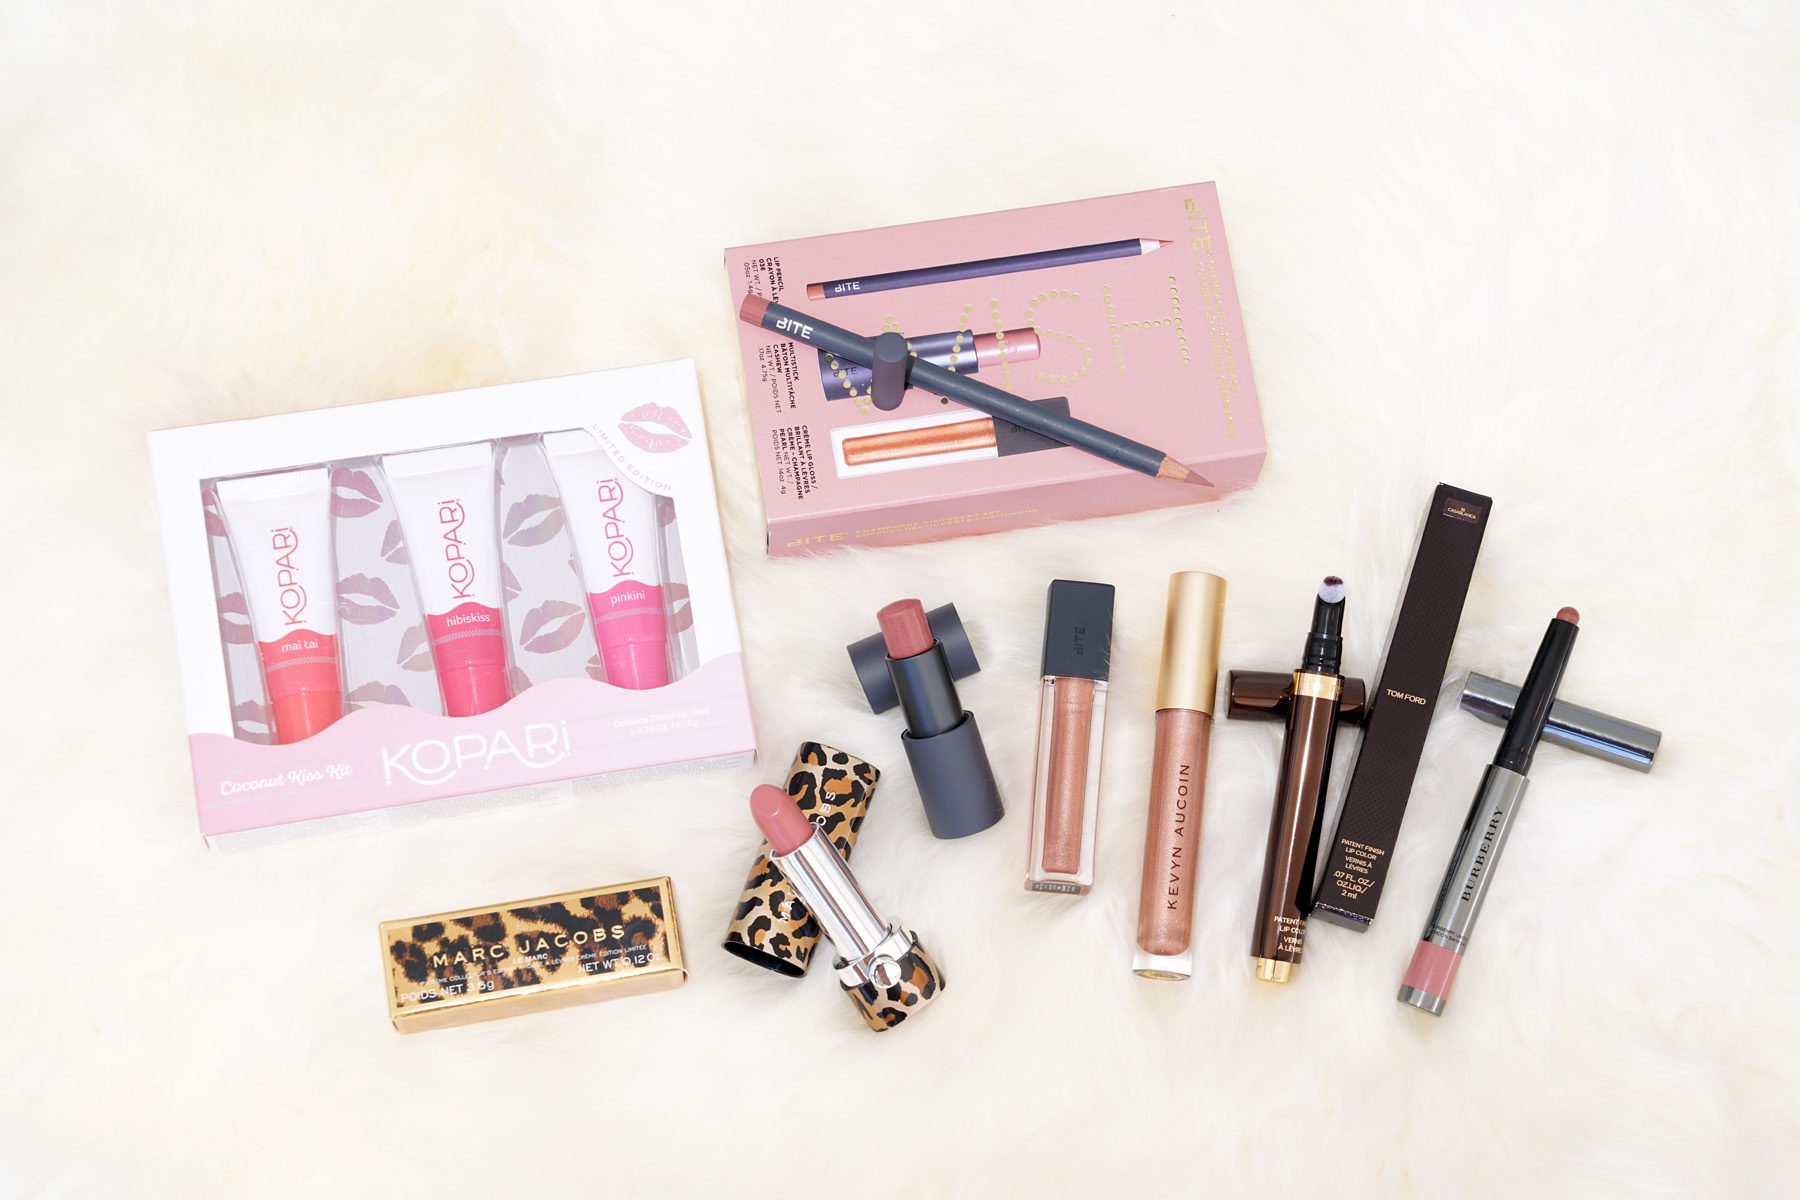 Sephora Favorites Give Me Some Nude Lip + Beauty Insider Birthday Minis -  The Beauty Look Book